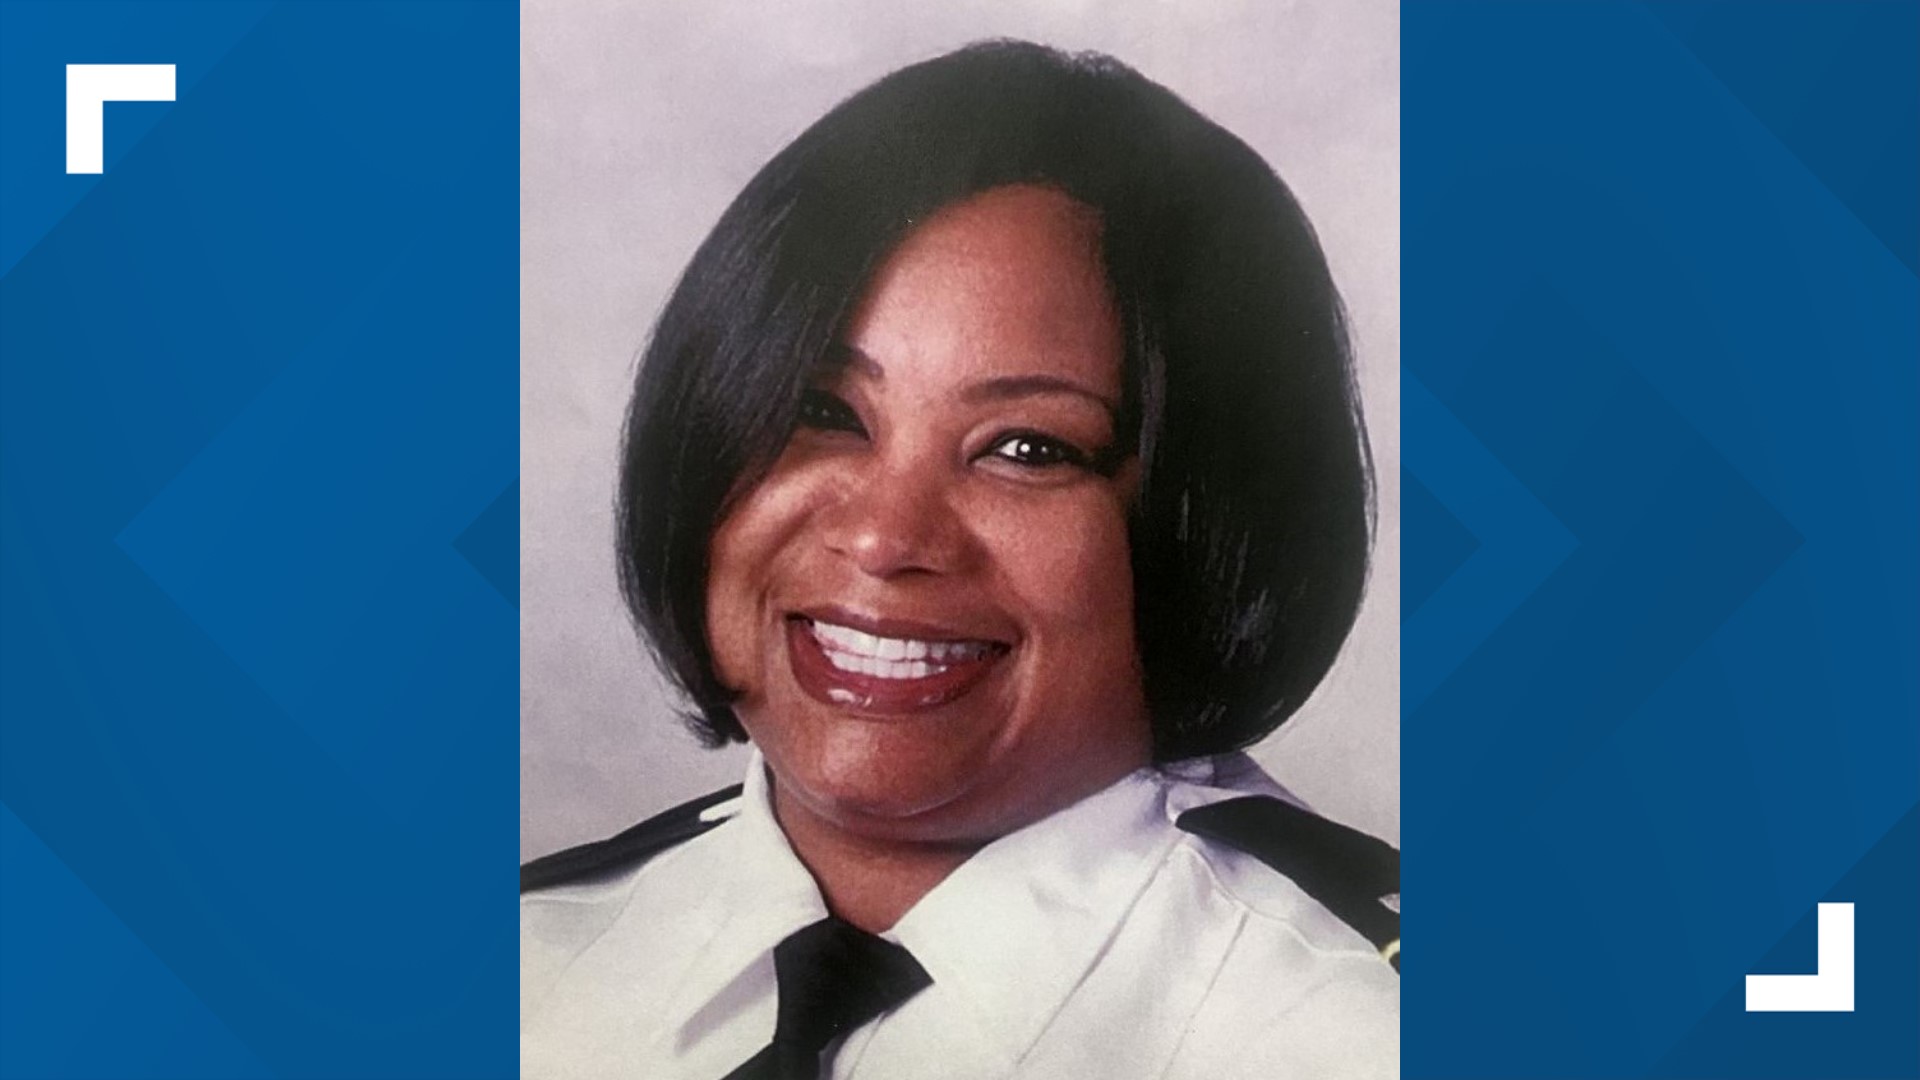 Jury Awards Ohio Police Lieutenant  After She Sued City of Columbus for Racial Discrimination and Retaliation